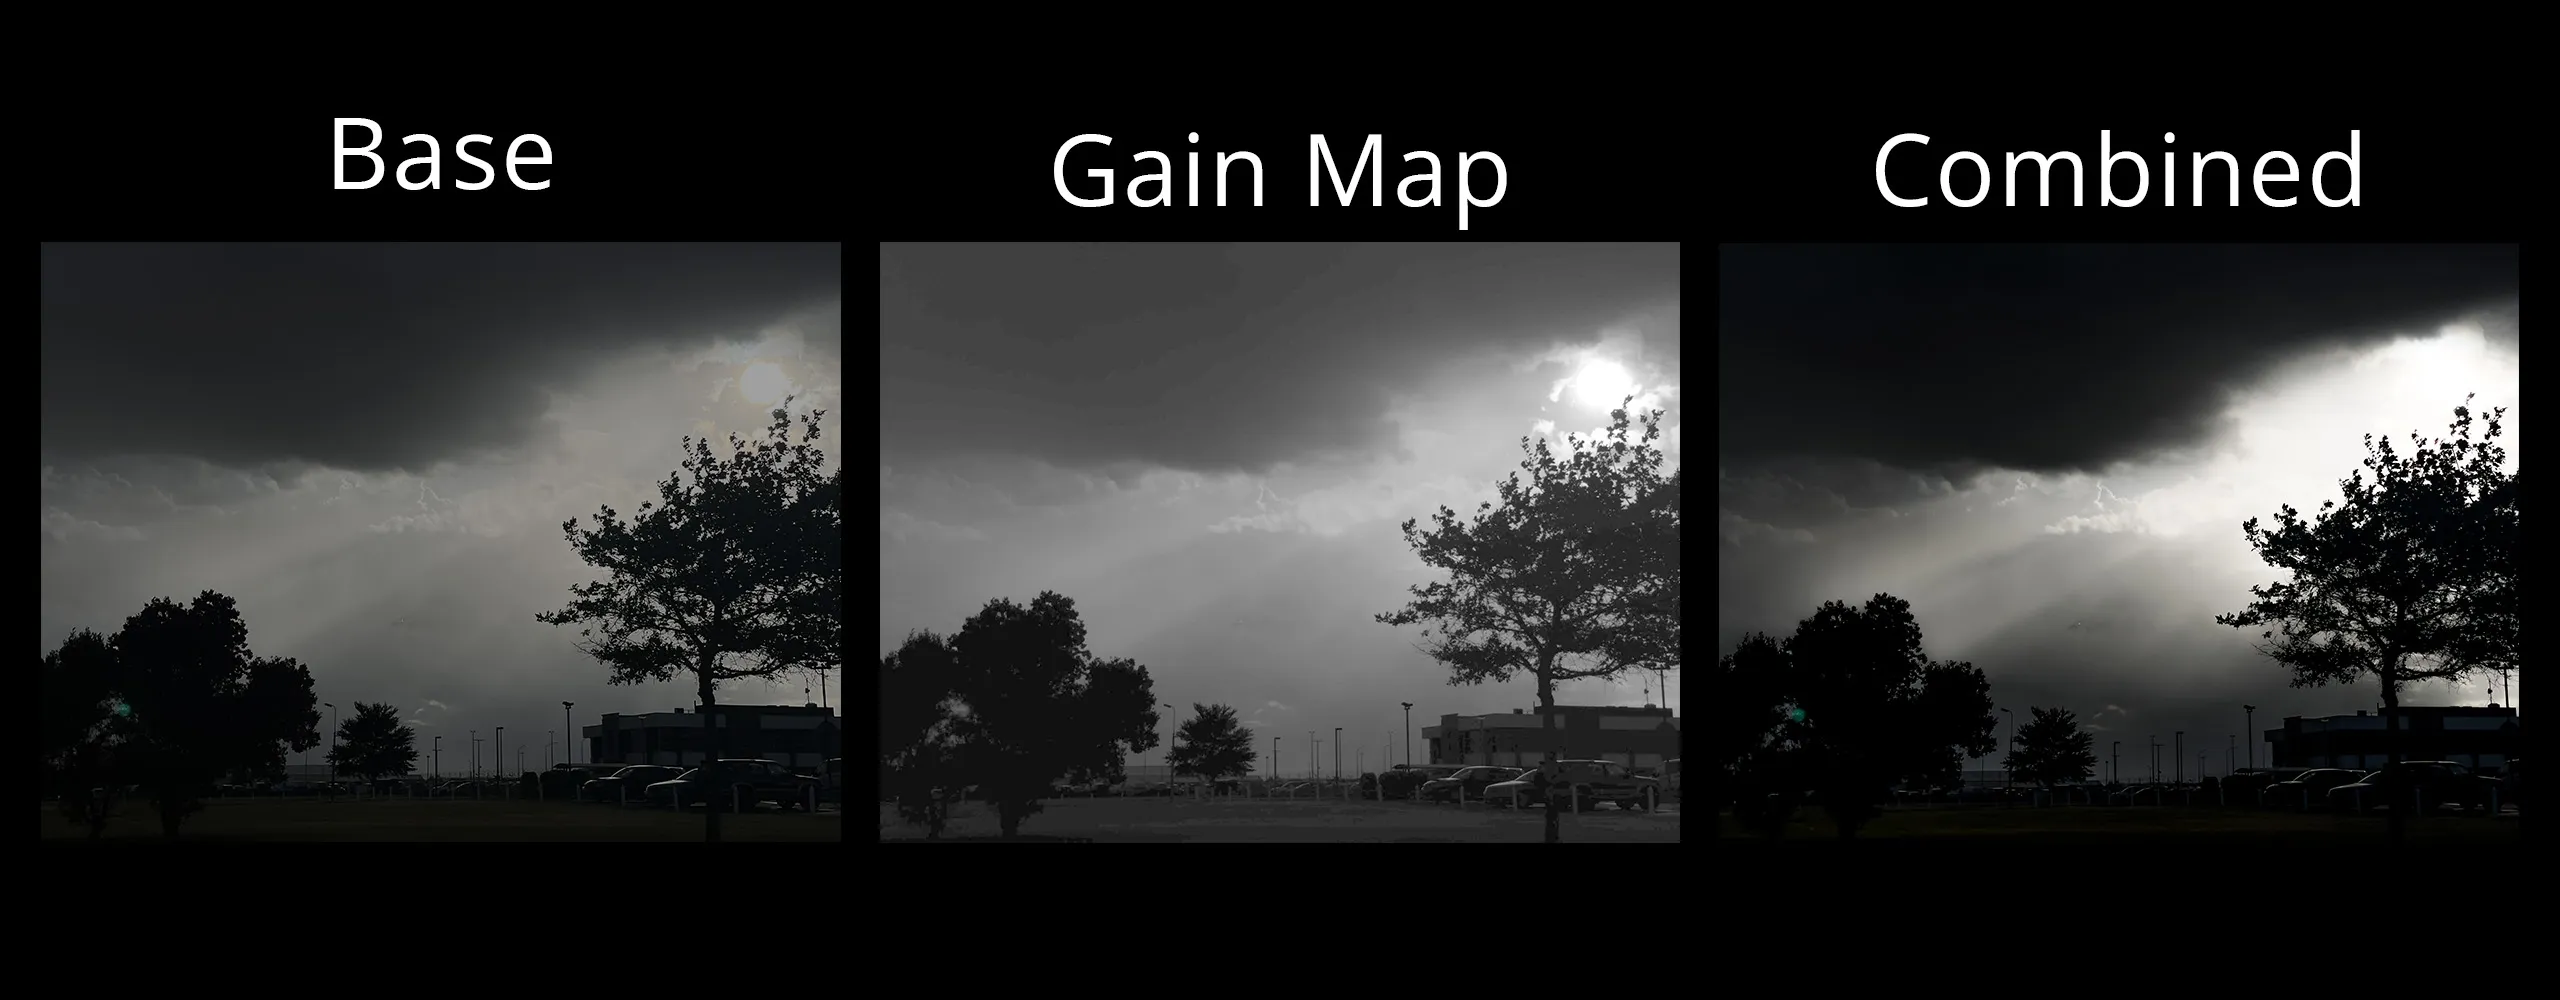 Three versions of the same image. Left: base, darkened color image.
Middle: gain map, monochrome brightness modifier. Right: final image more
contrast and brighter highlights. The image is of a dramatic sky with dark
clouds and sunbeams, with trees and a parking lot in the foreground
